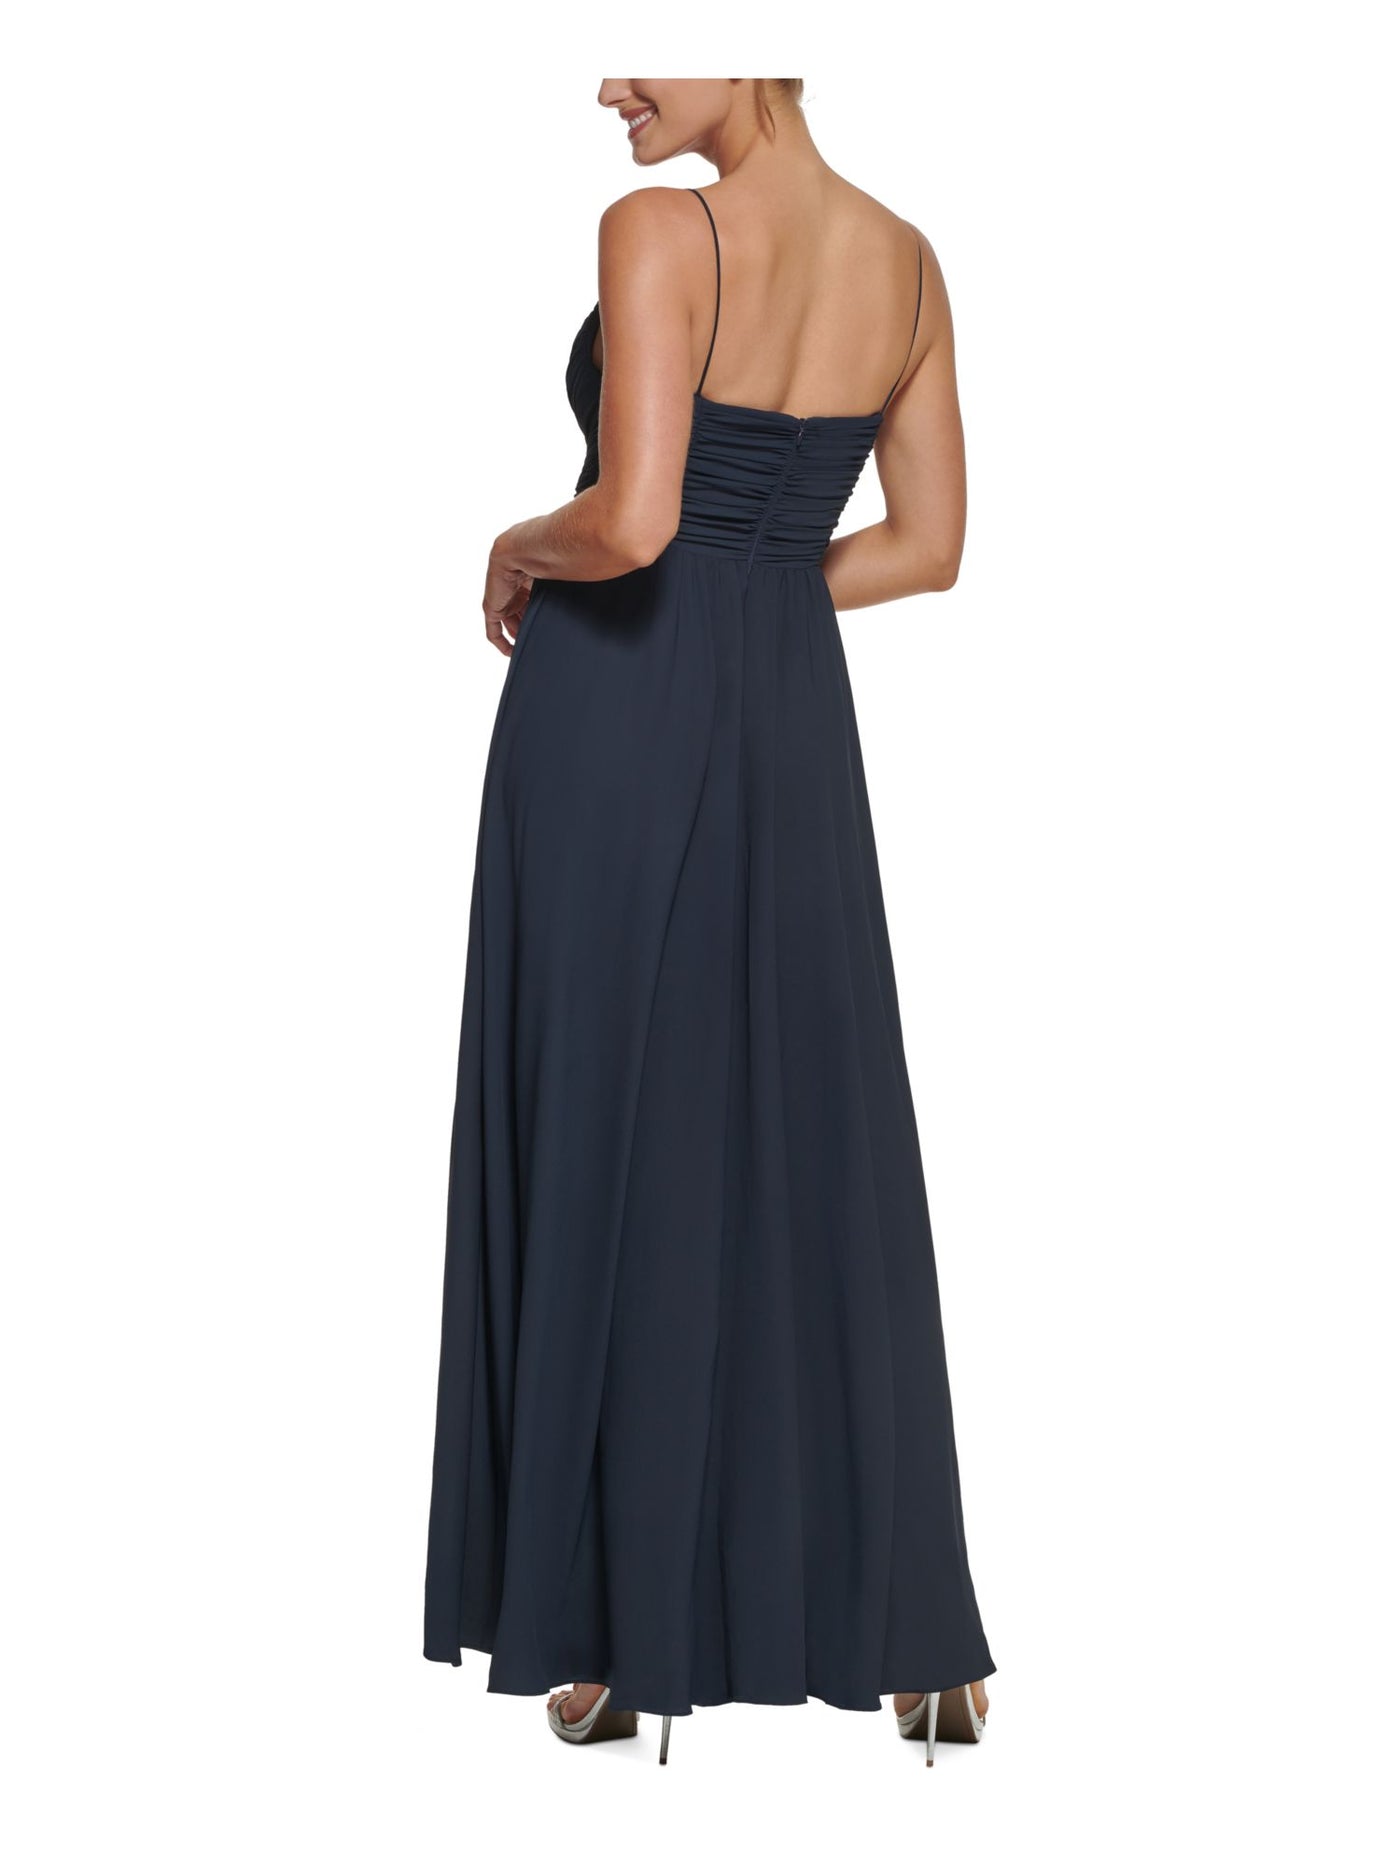 DKNY Womens Navy Ruched Zippered Lined Spaghetti Strap V Neck Full-Length Formal Gown Dress 12